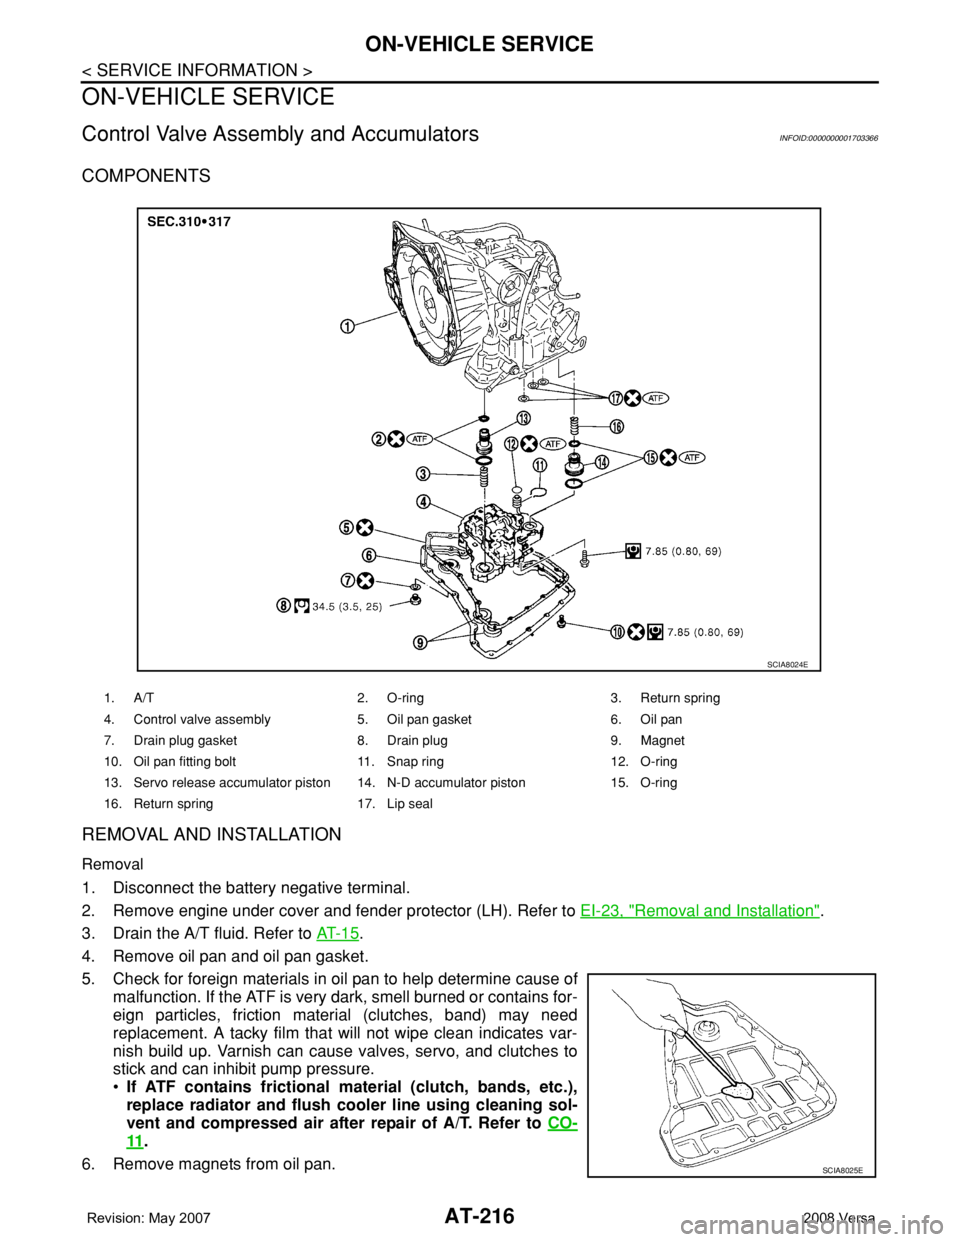 NISSAN LATIO 2008  Service Repair Manual AT-216
< SERVICE INFORMATION >
ON-VEHICLE SERVICE
ON-VEHICLE SERVICE
Control Valve Assembly and AccumulatorsINFOID:0000000001703366
COMPONENTS
REMOVAL AND INSTALLATION
Removal
1. Disconnect the batter